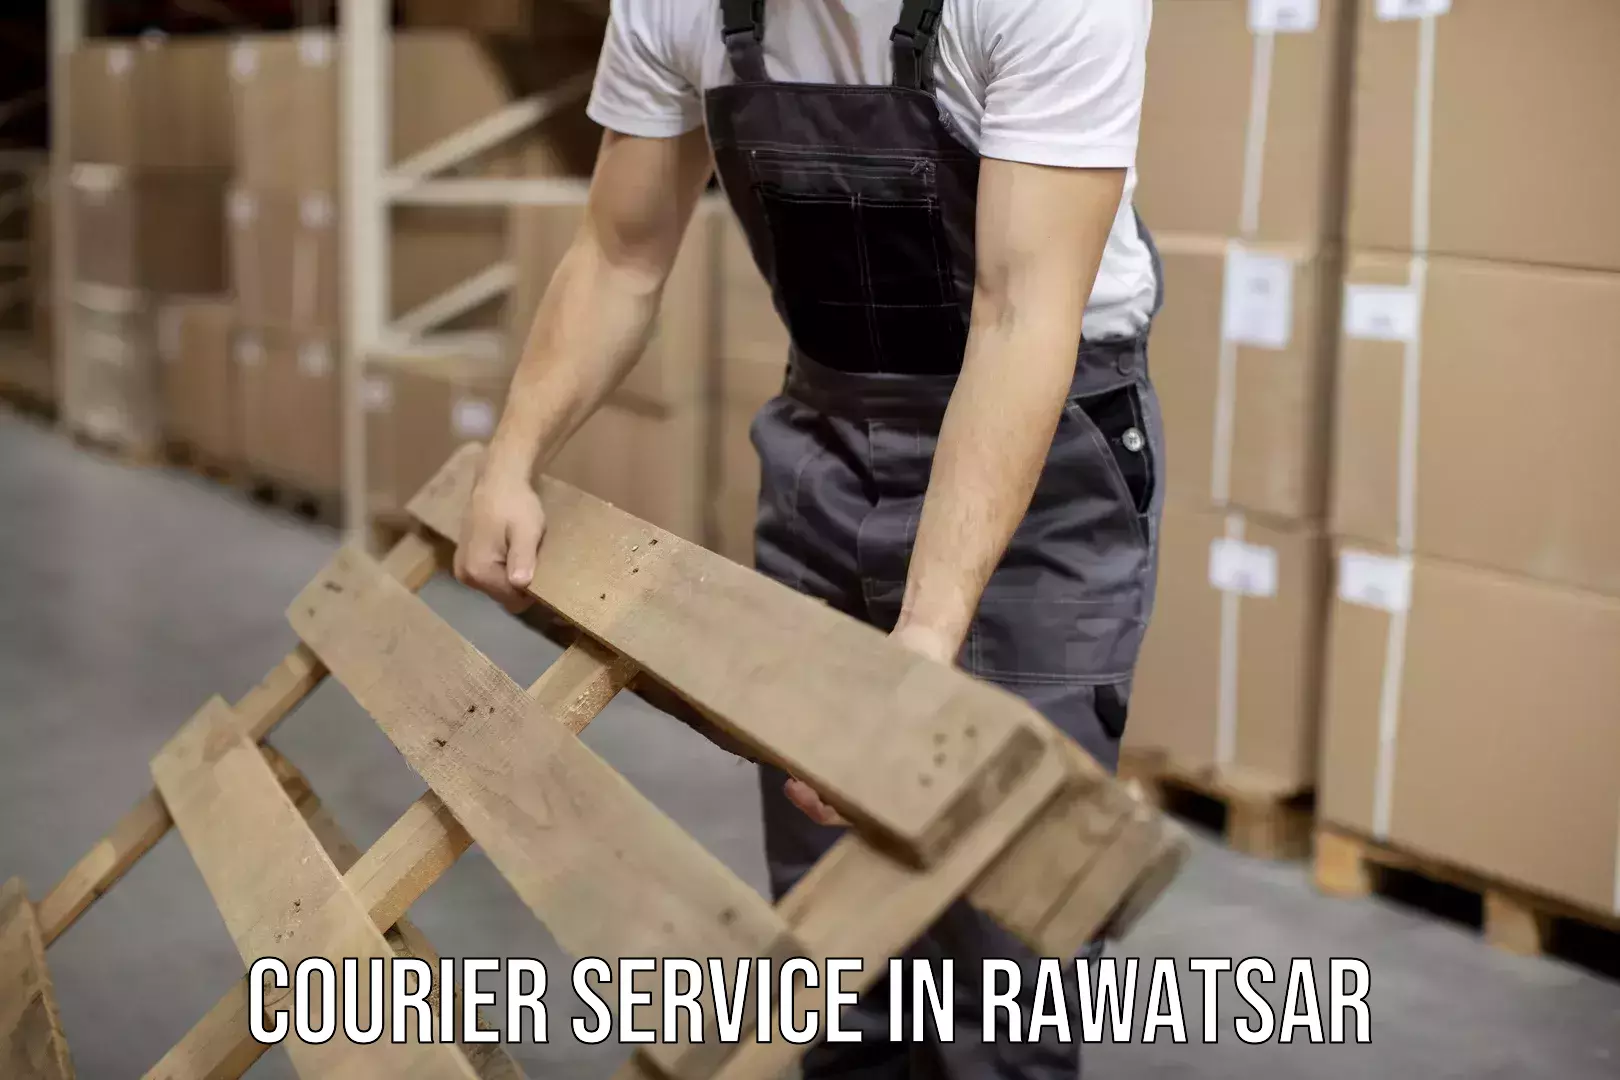 Round-the-clock parcel delivery in Rawatsar